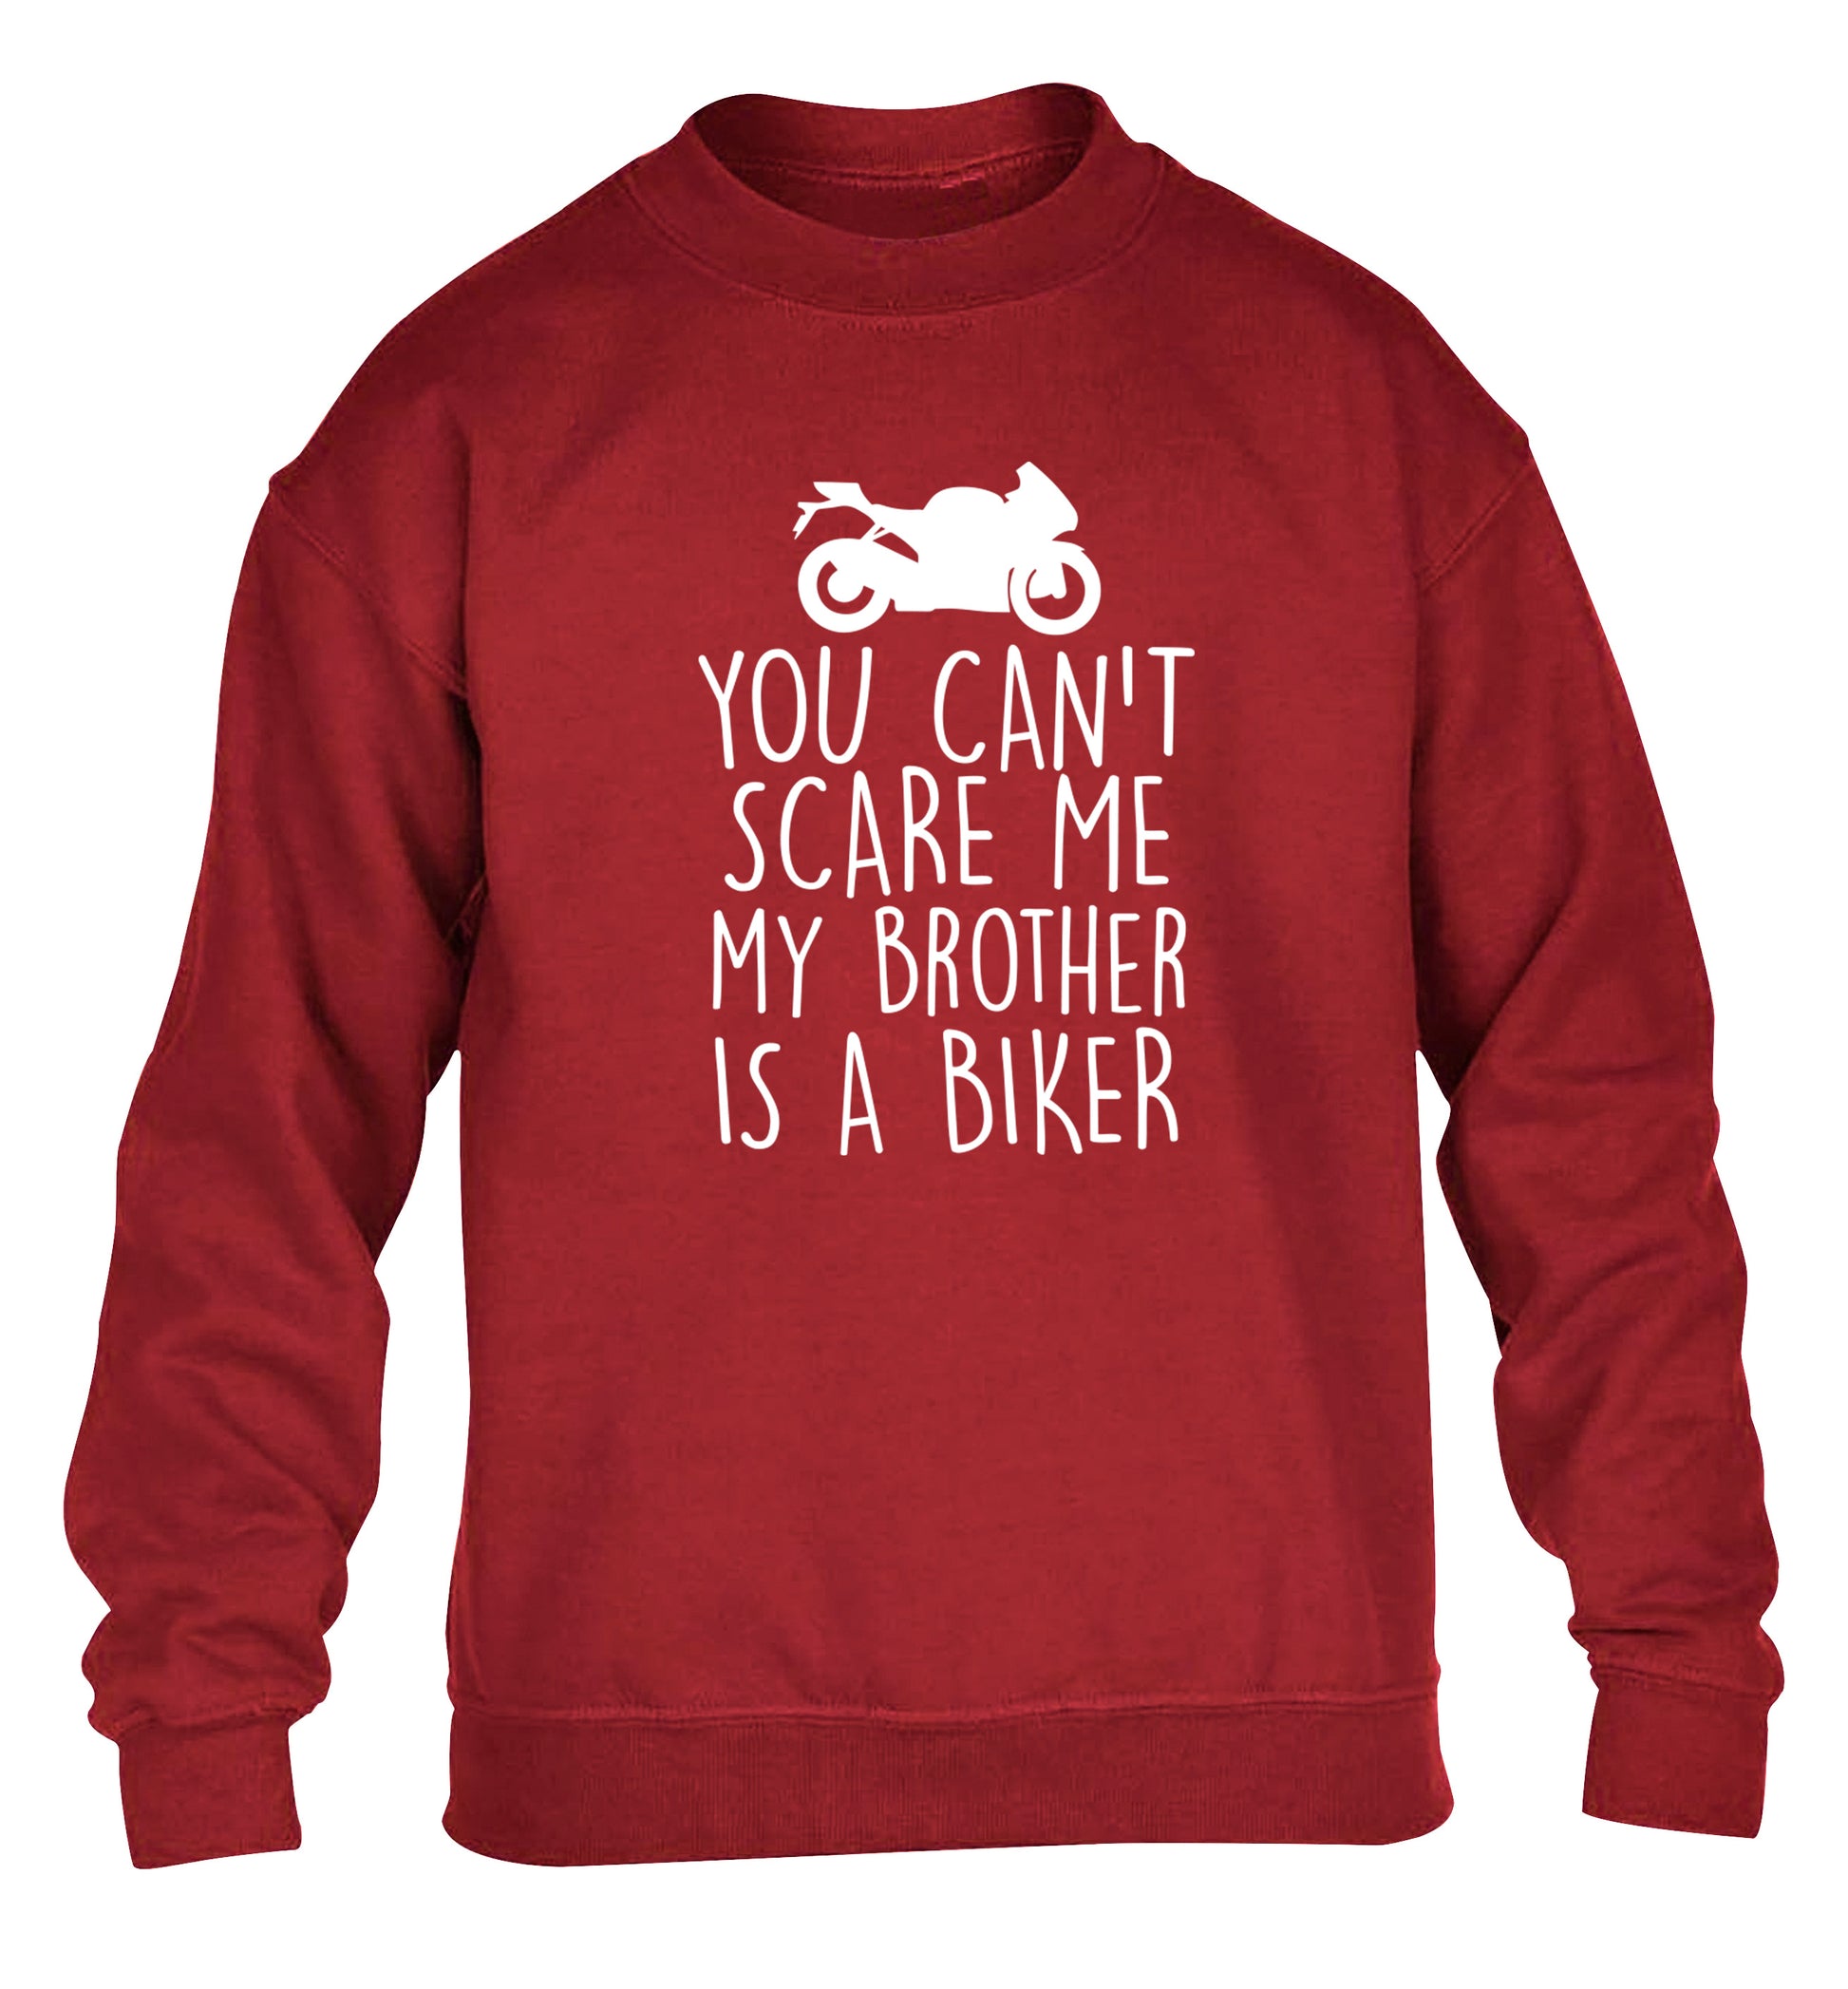 You can't scare me my brother is a biker children's grey sweater 12-13 Years